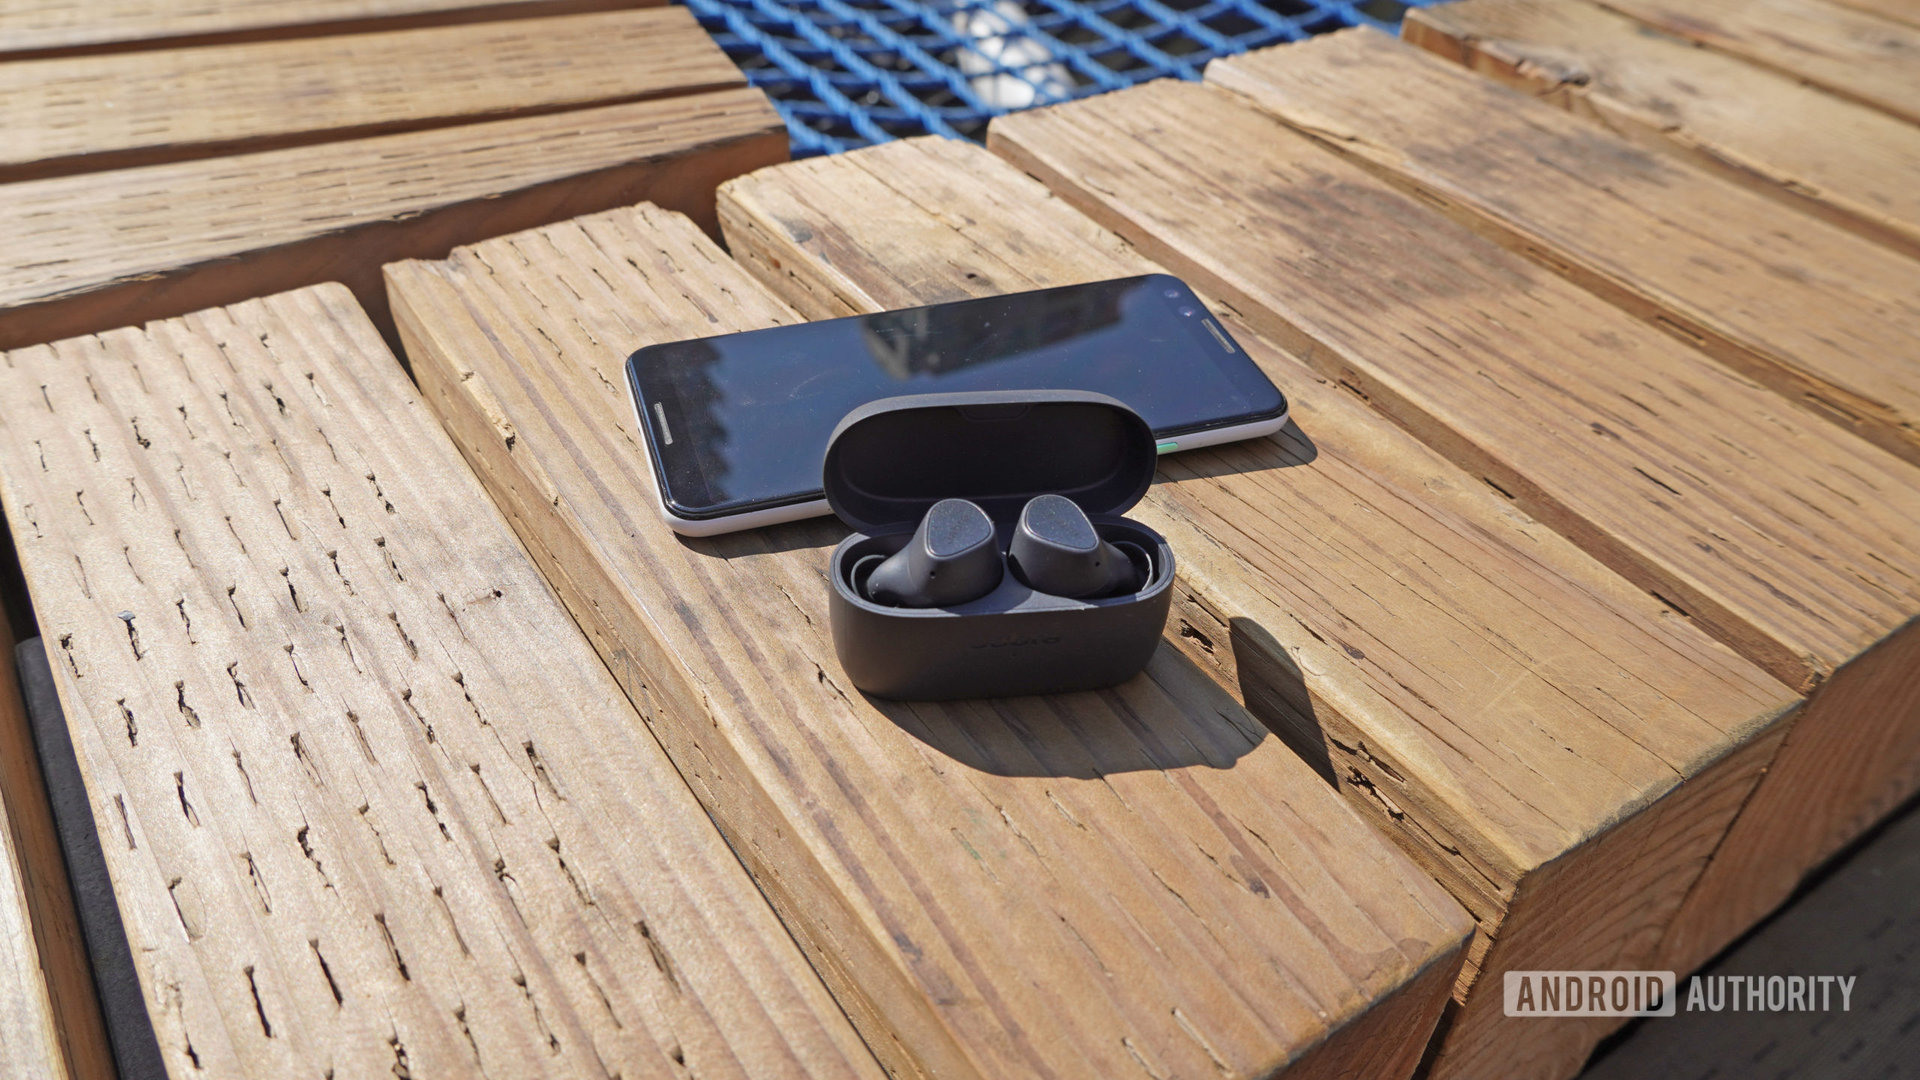 The Jabra Elite 3 earbuds sitting in their case next to a smartphone outdoors on a wooden bench.